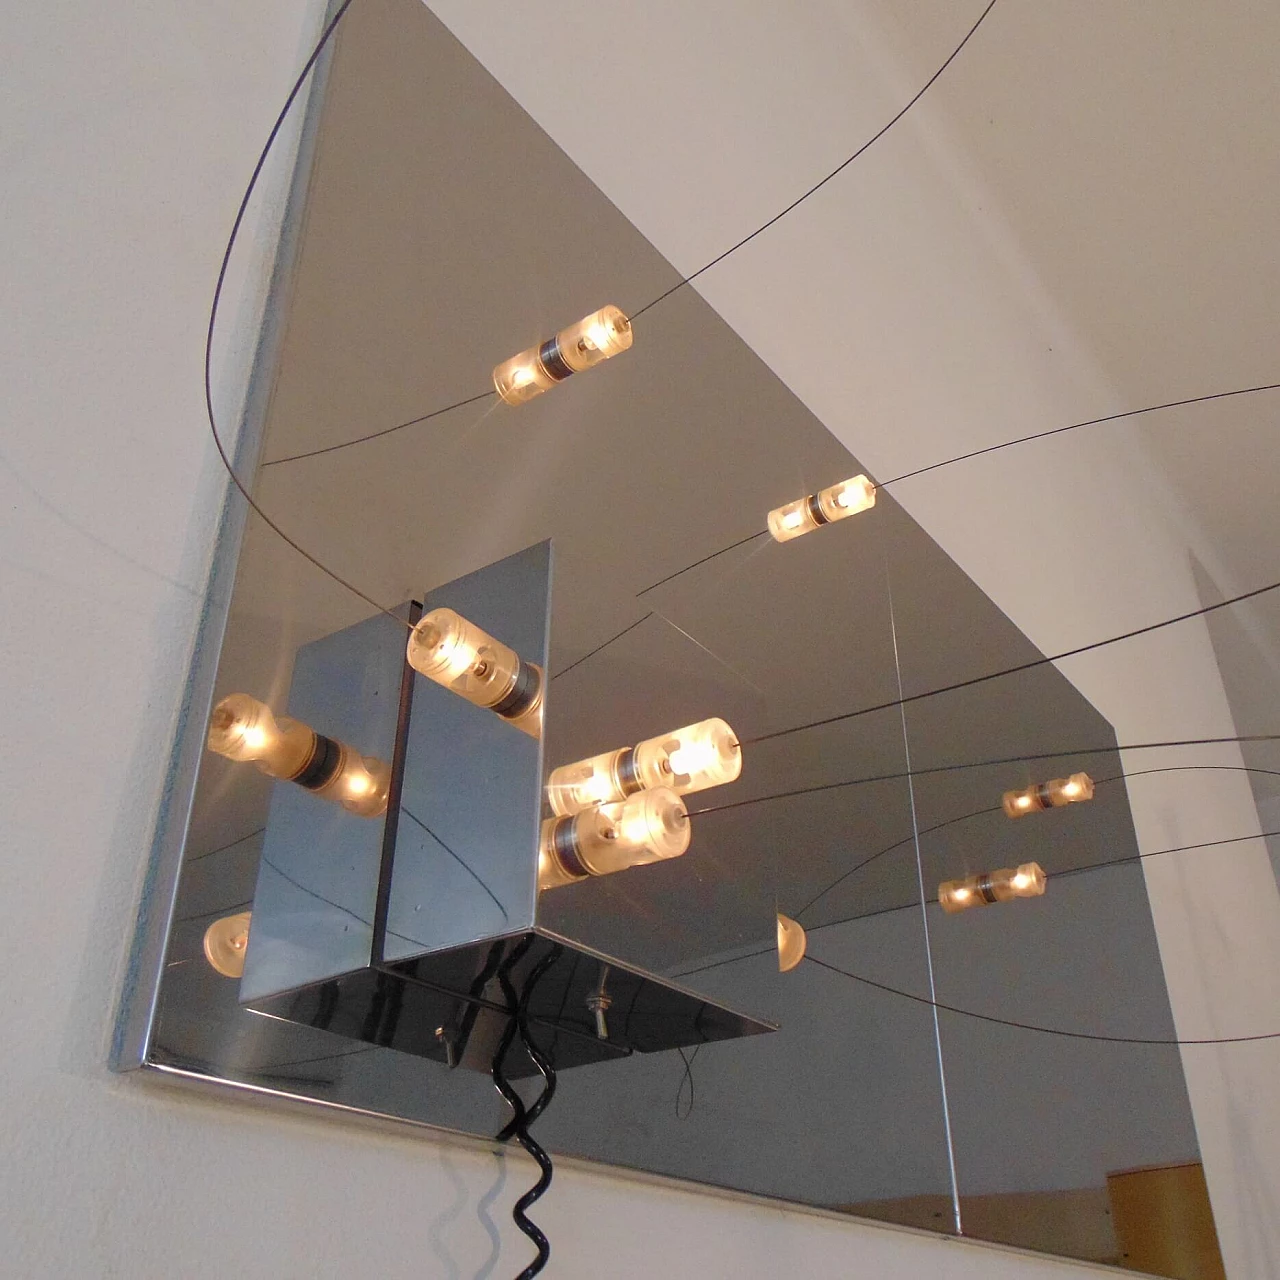 Mirrored Wall Lamp with Magnetic Movable Lights by ARDITI, Sormani Nucleo, Italy 1069177